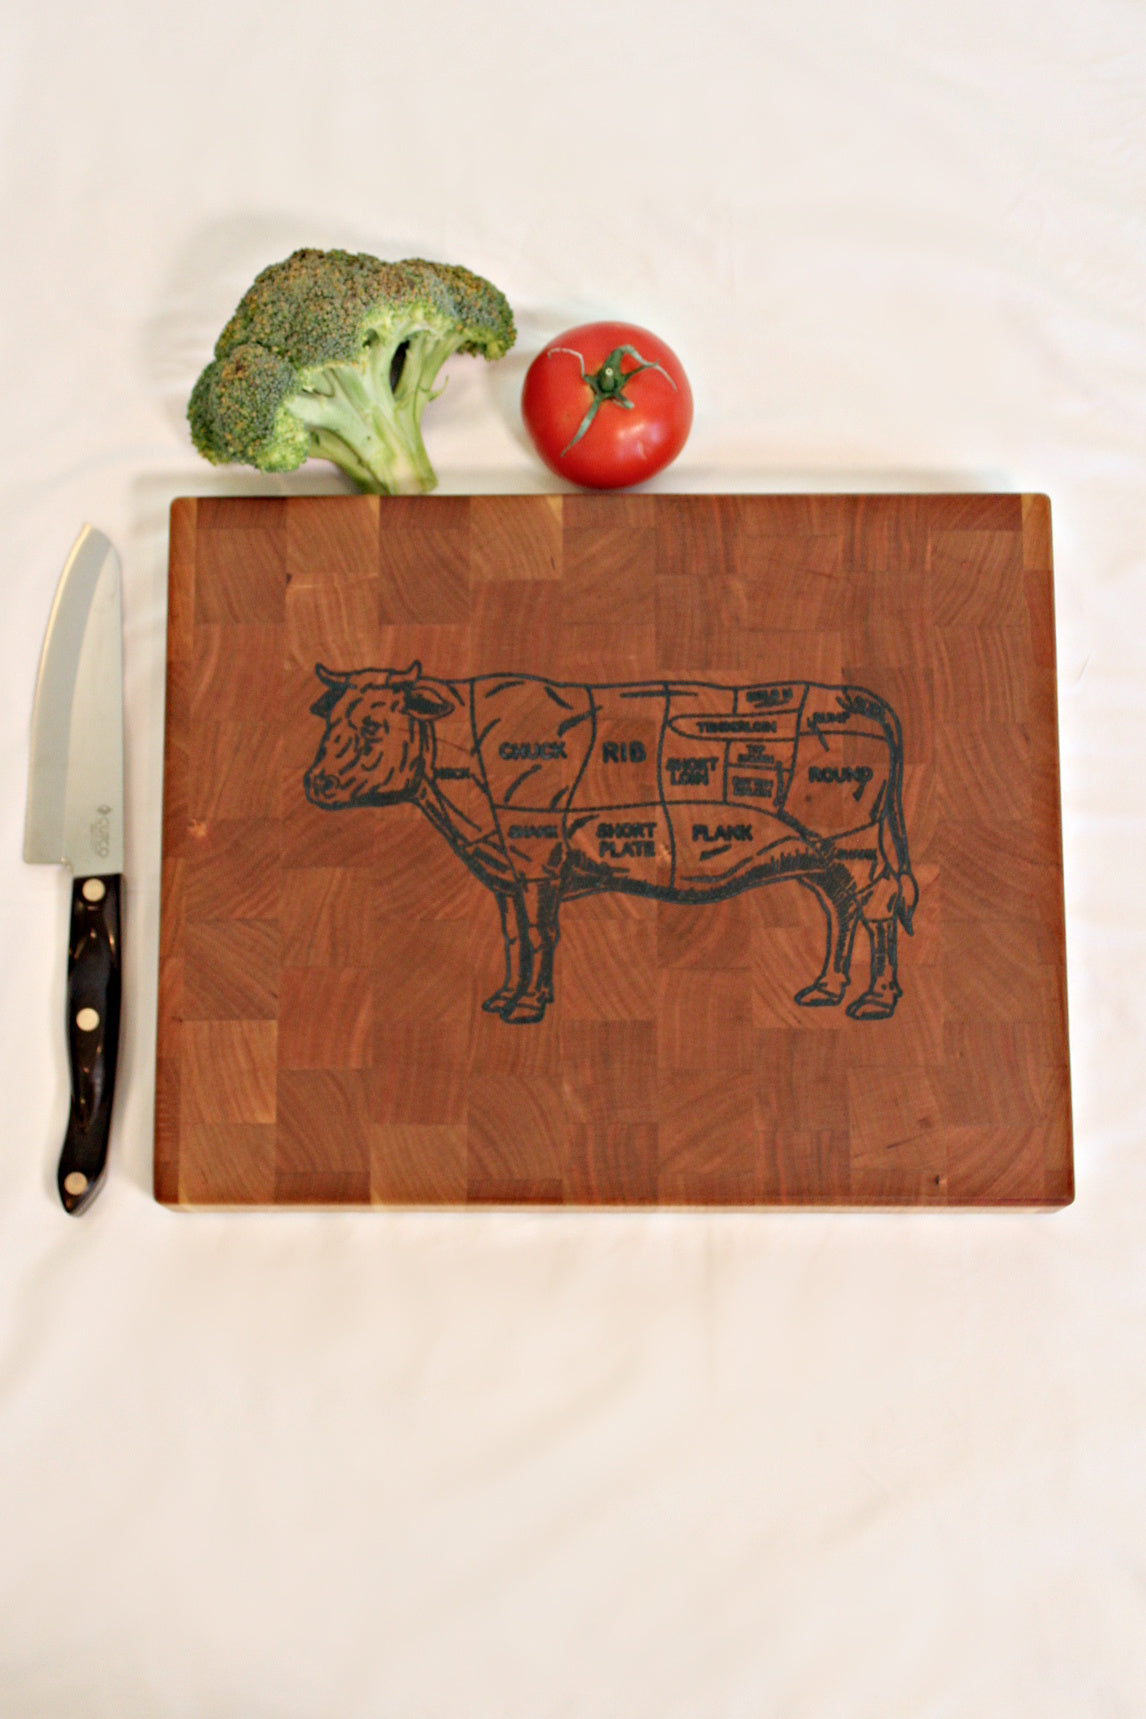 The Ultimate Cutting Board for Beef 